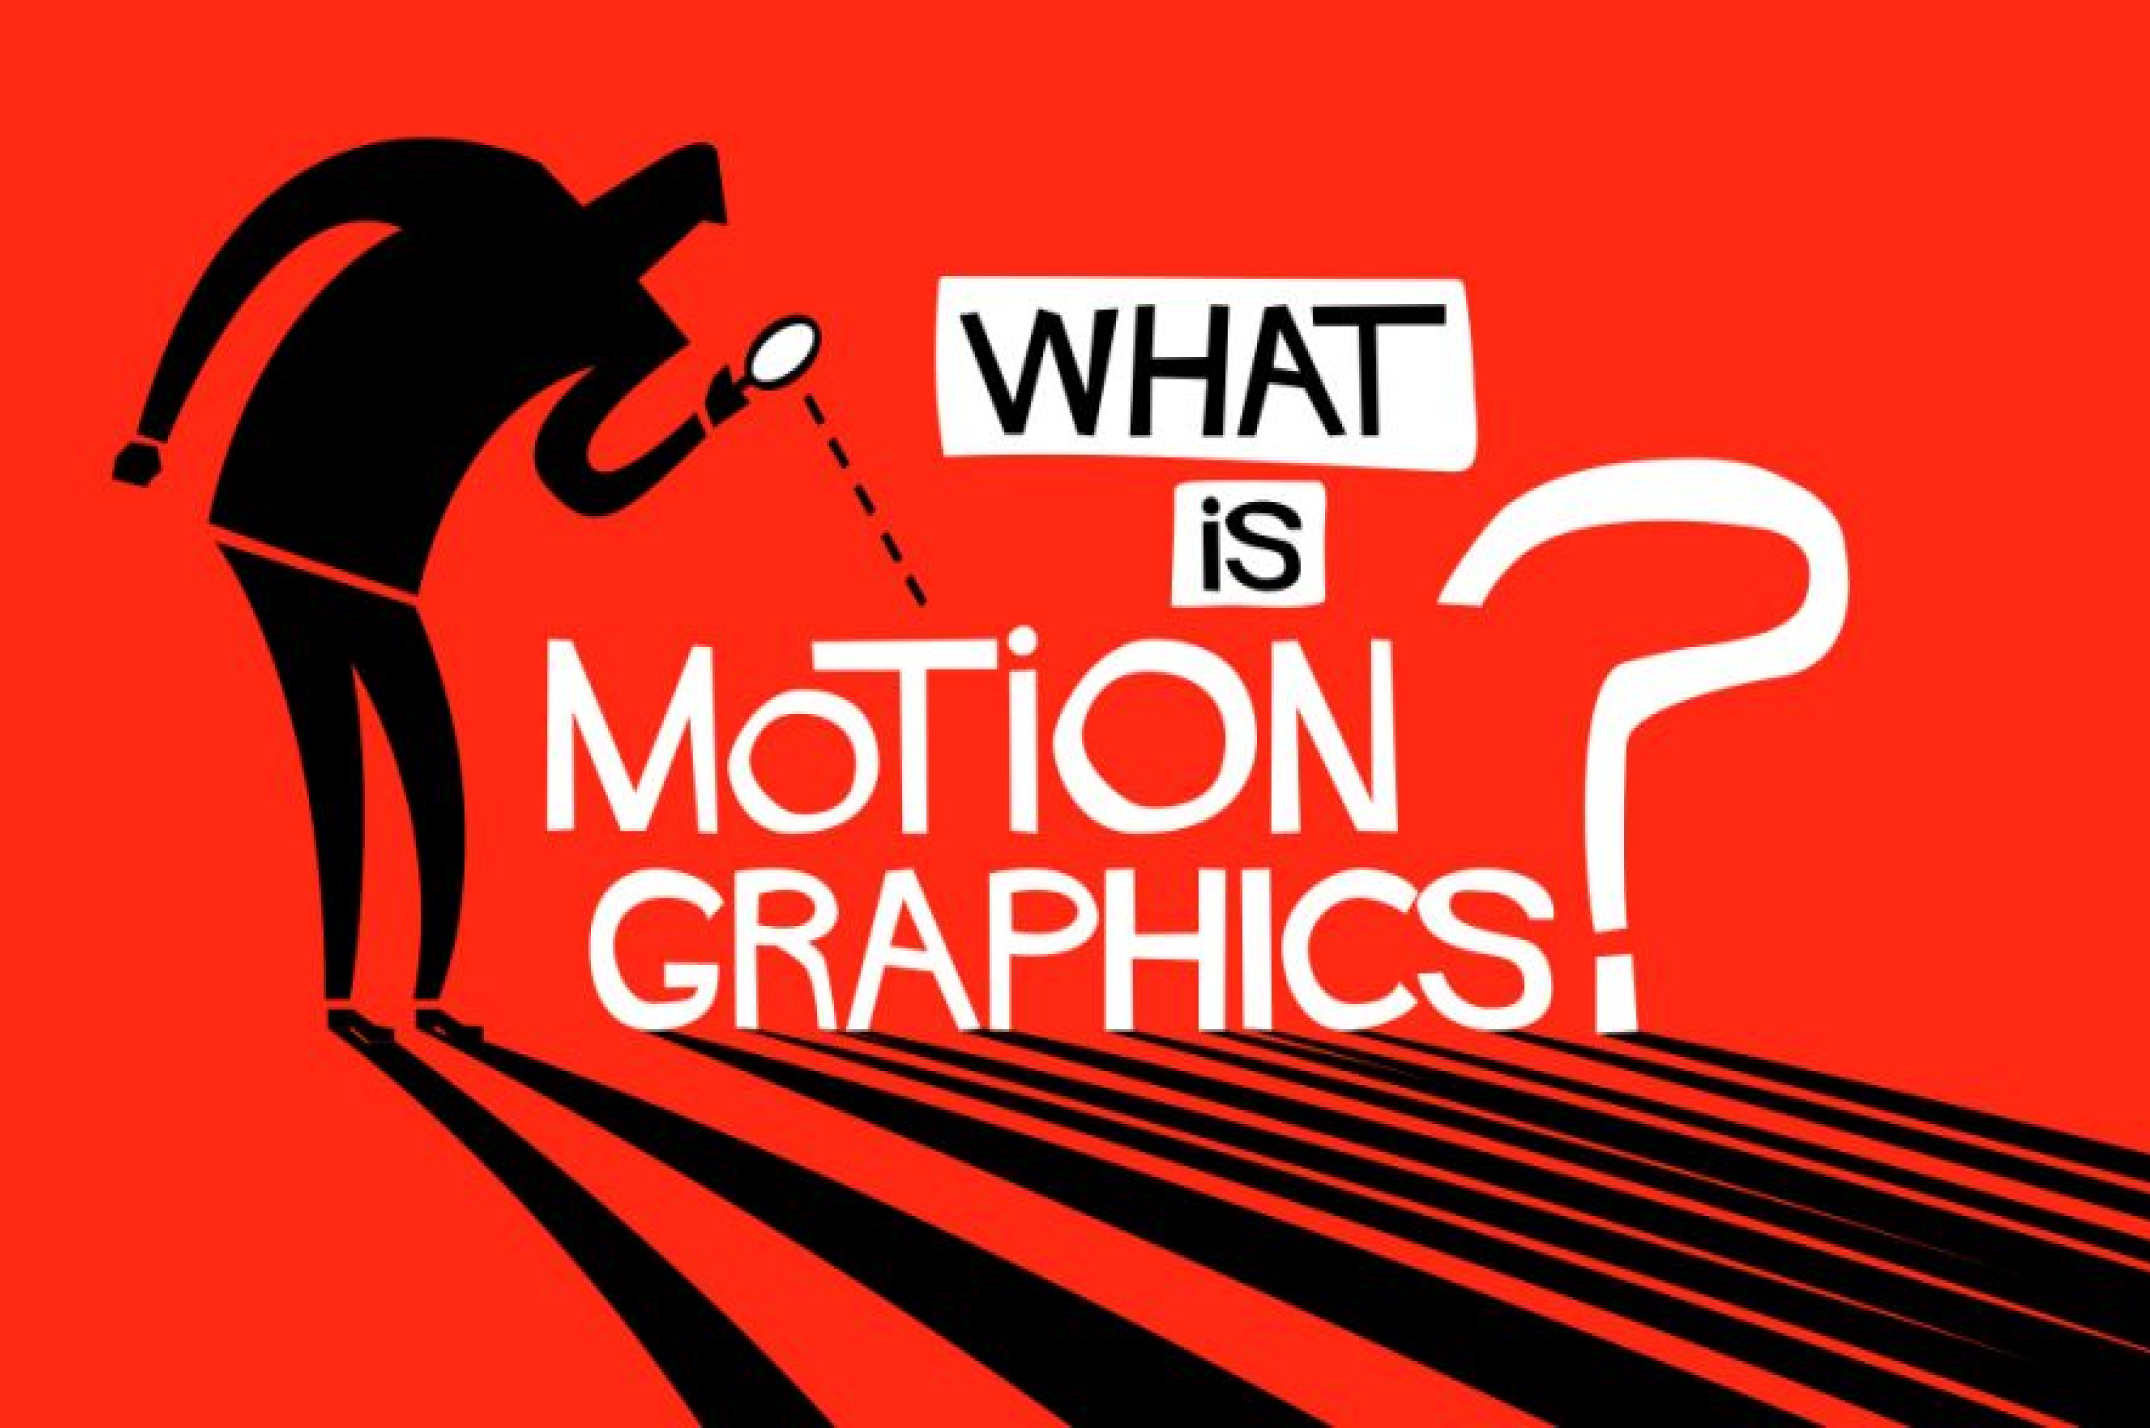 Telling a story with motion graphics!